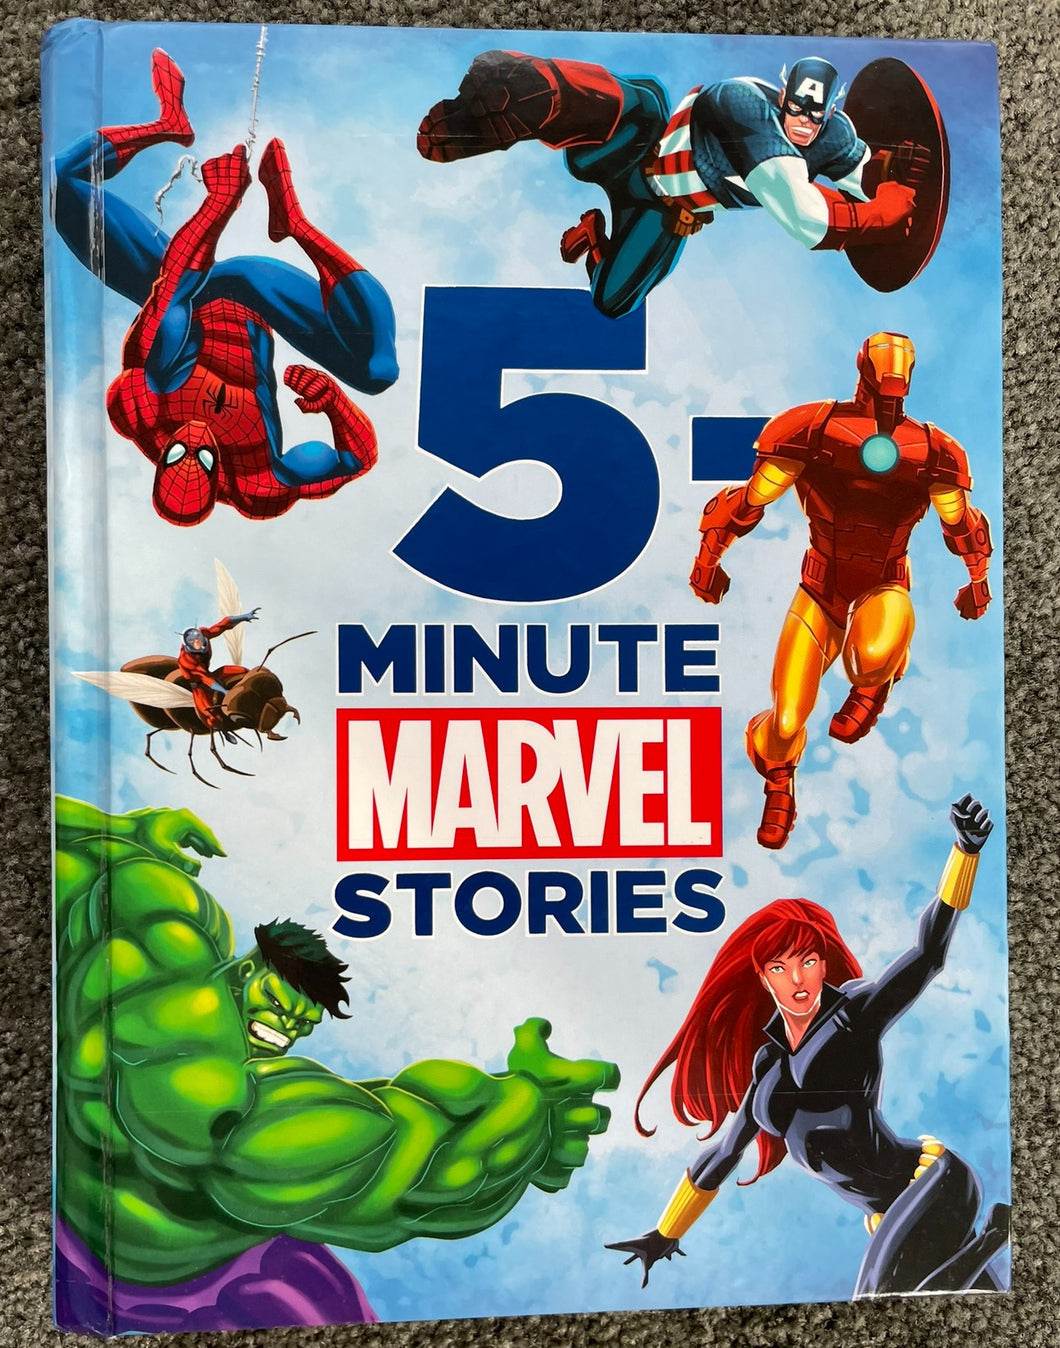 5 Minute Marvel Stories Hard Cover Superhero Story Collection